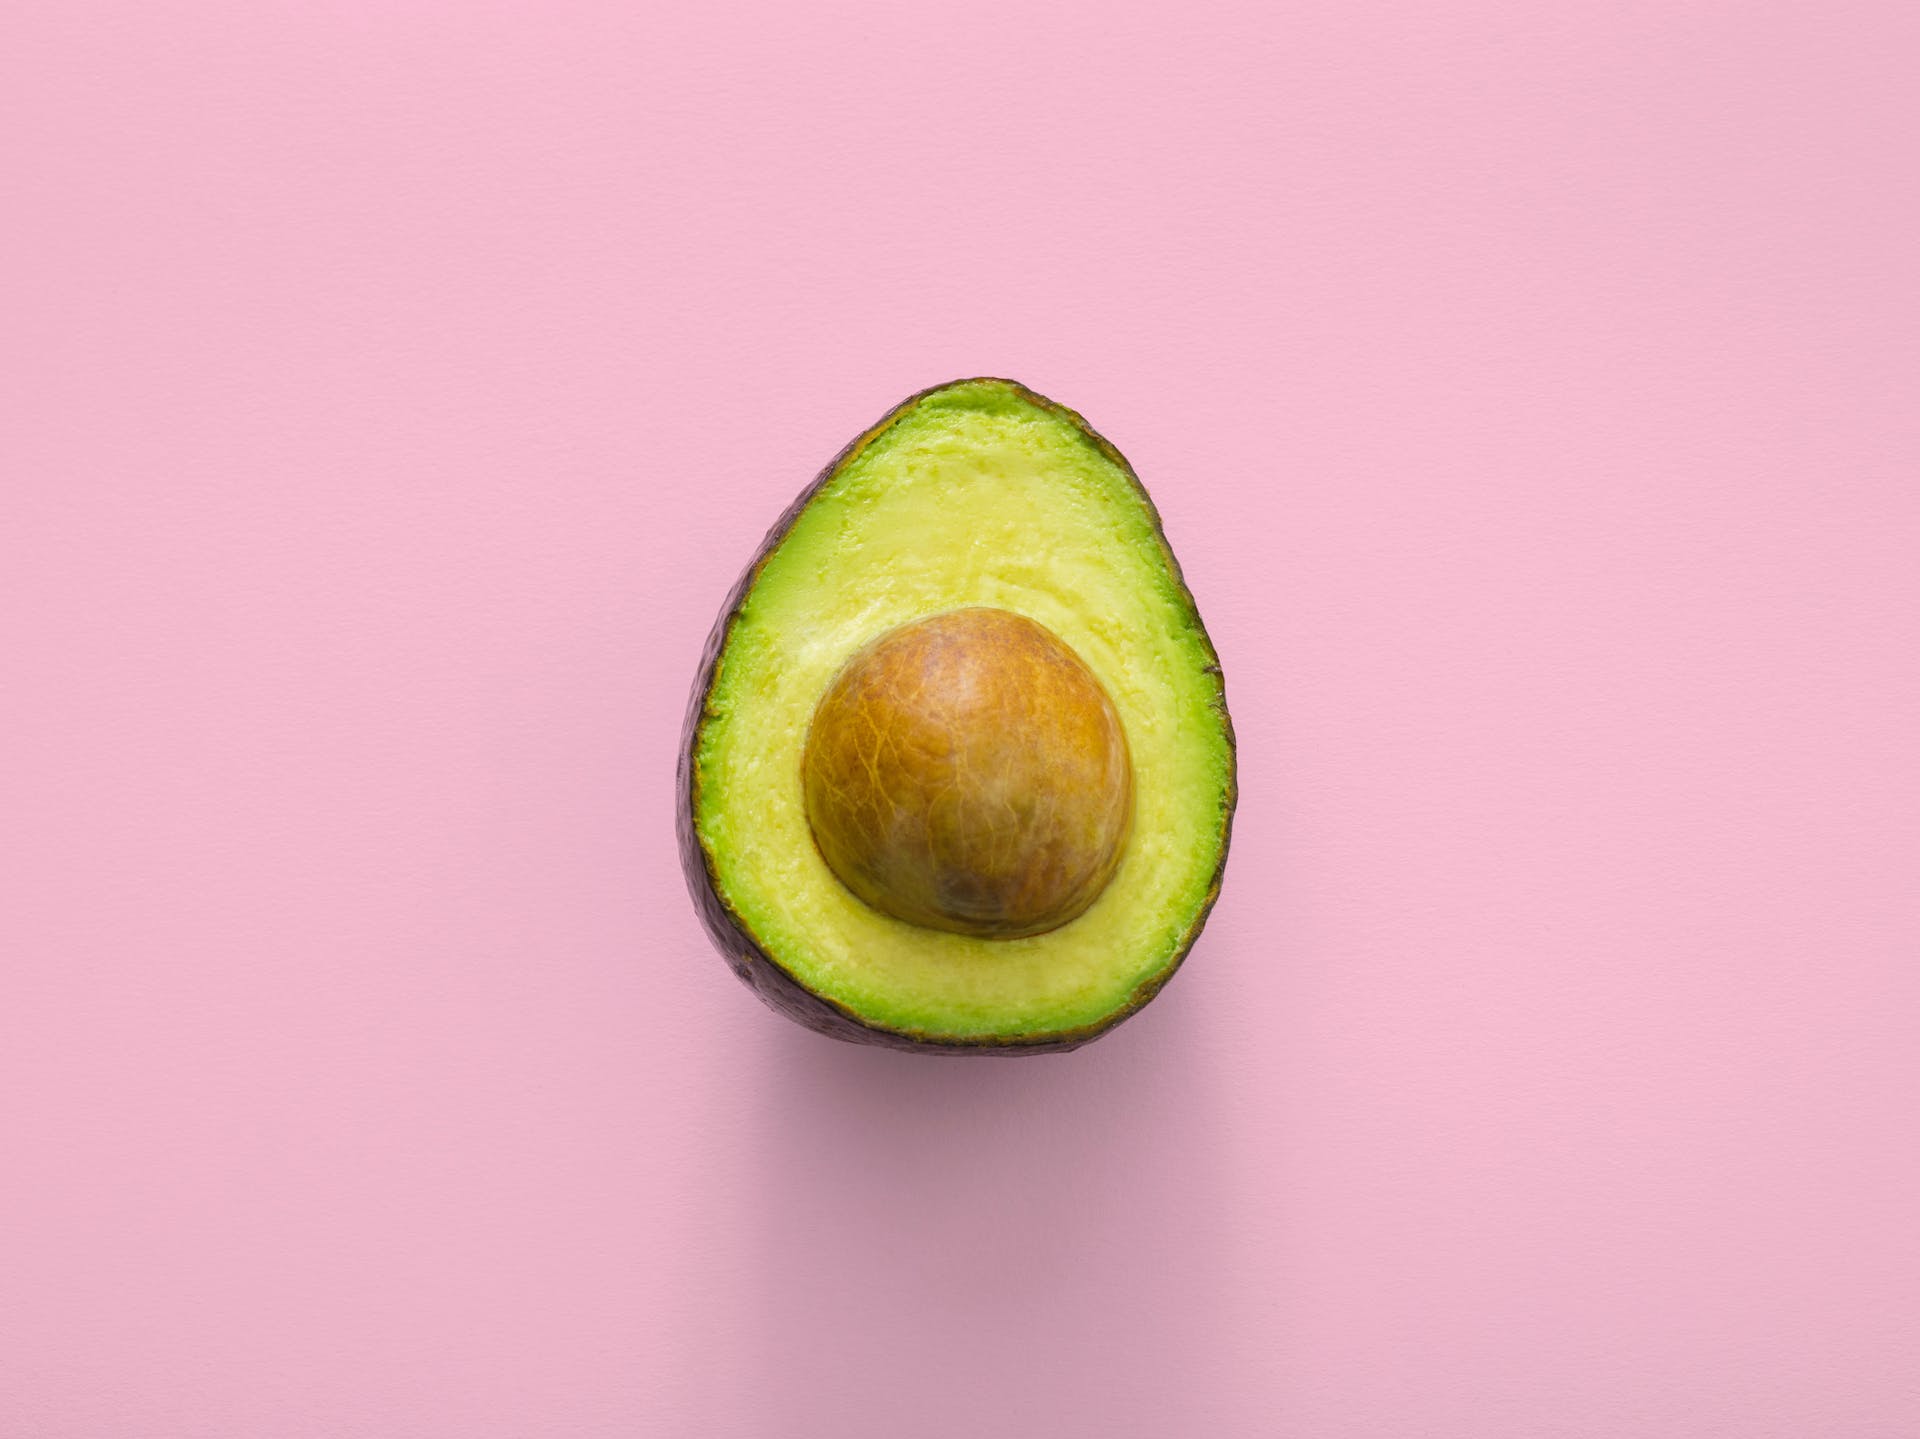 When selecting avocados, look for fruits that yield slightly to gentle pressure but are not overly soft